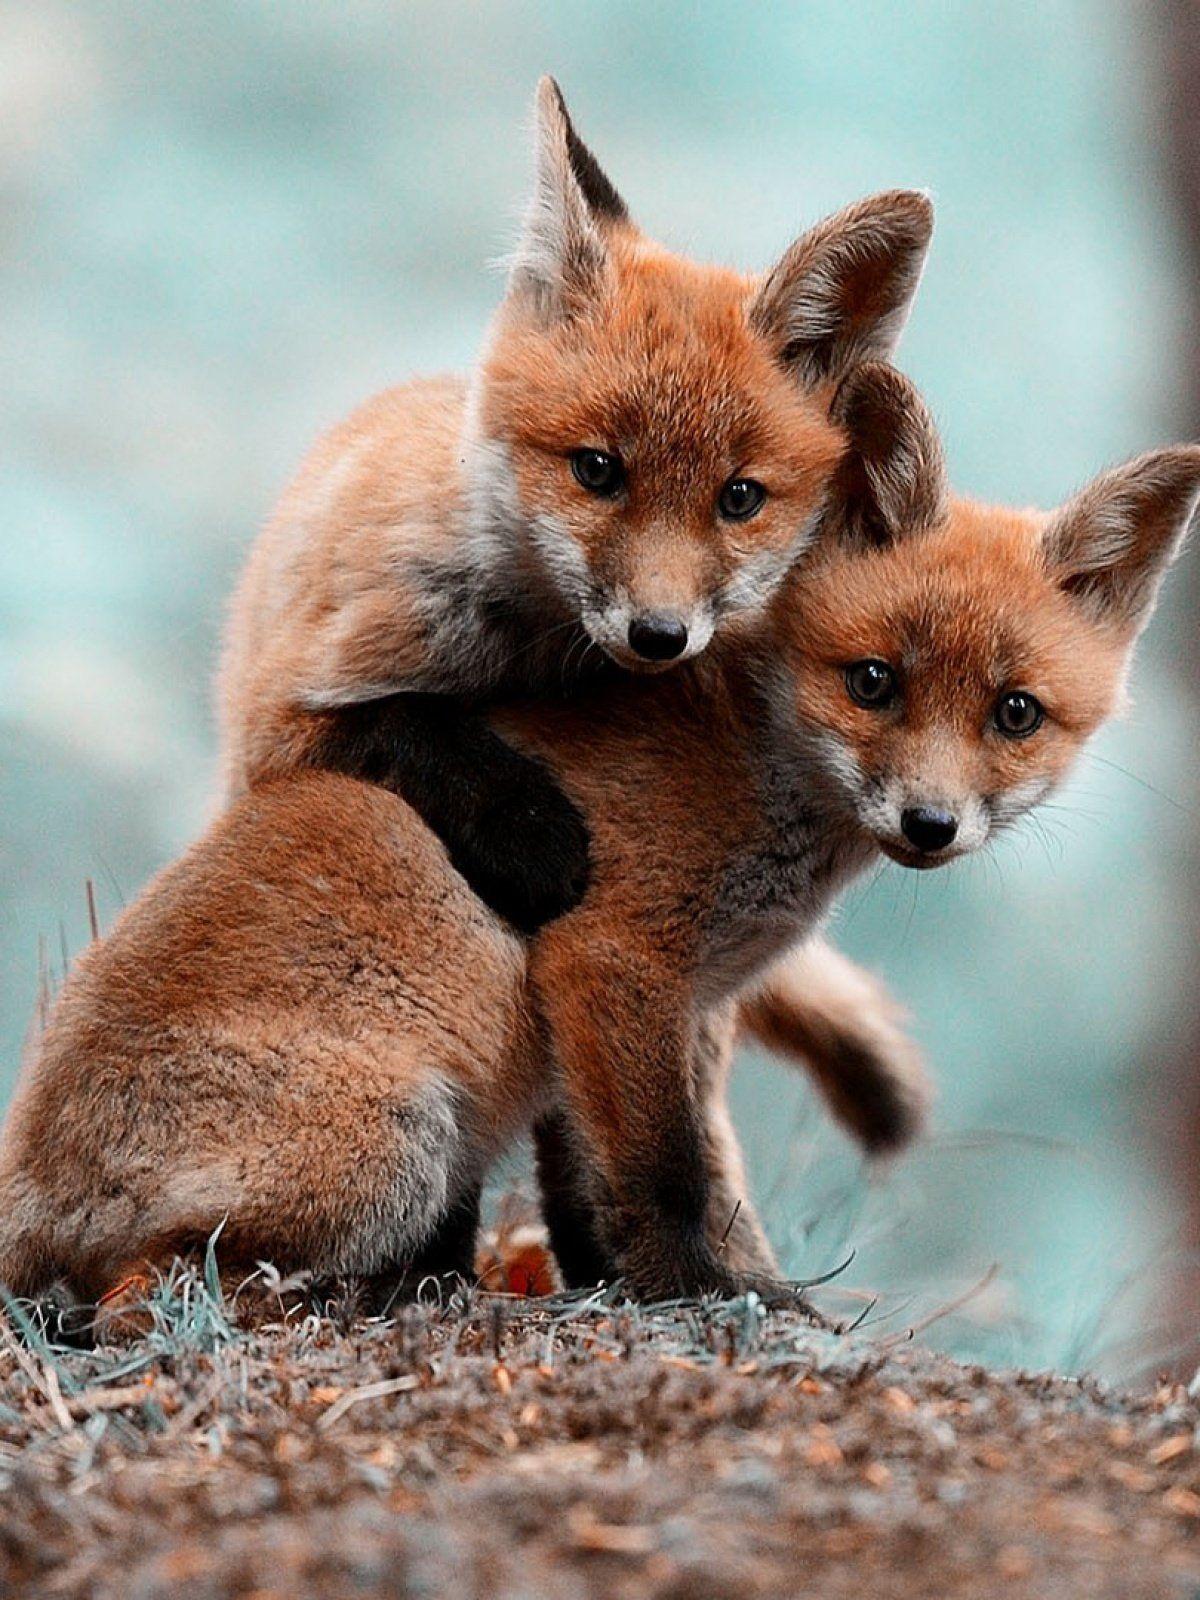 Animals cute baby Foxes mobile wallpaper Animals cute baby Foxes